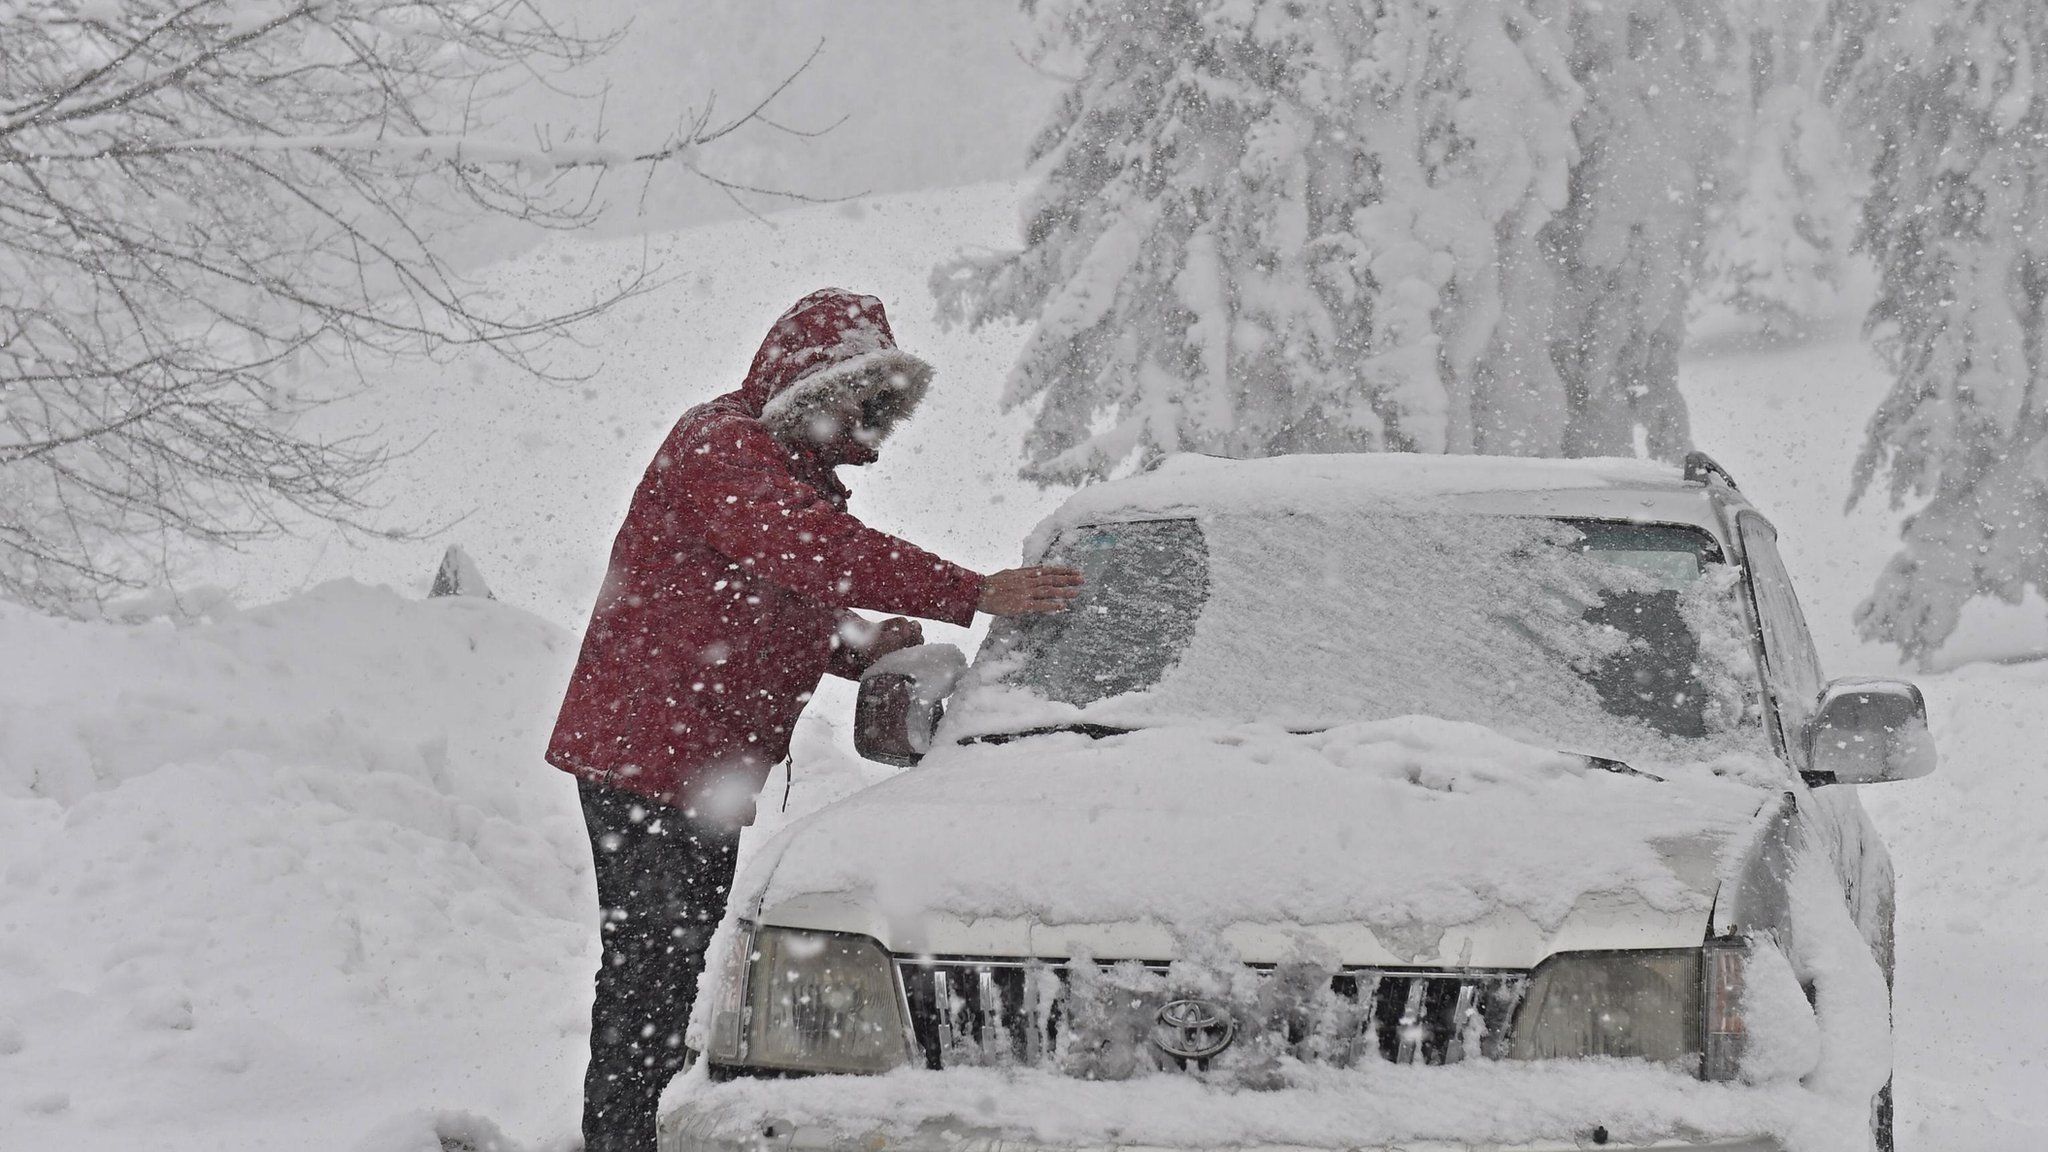 A person clears snow from a vehicle after a heavy snowfall in Casaglia, Mugello, Florence"s province, Italy